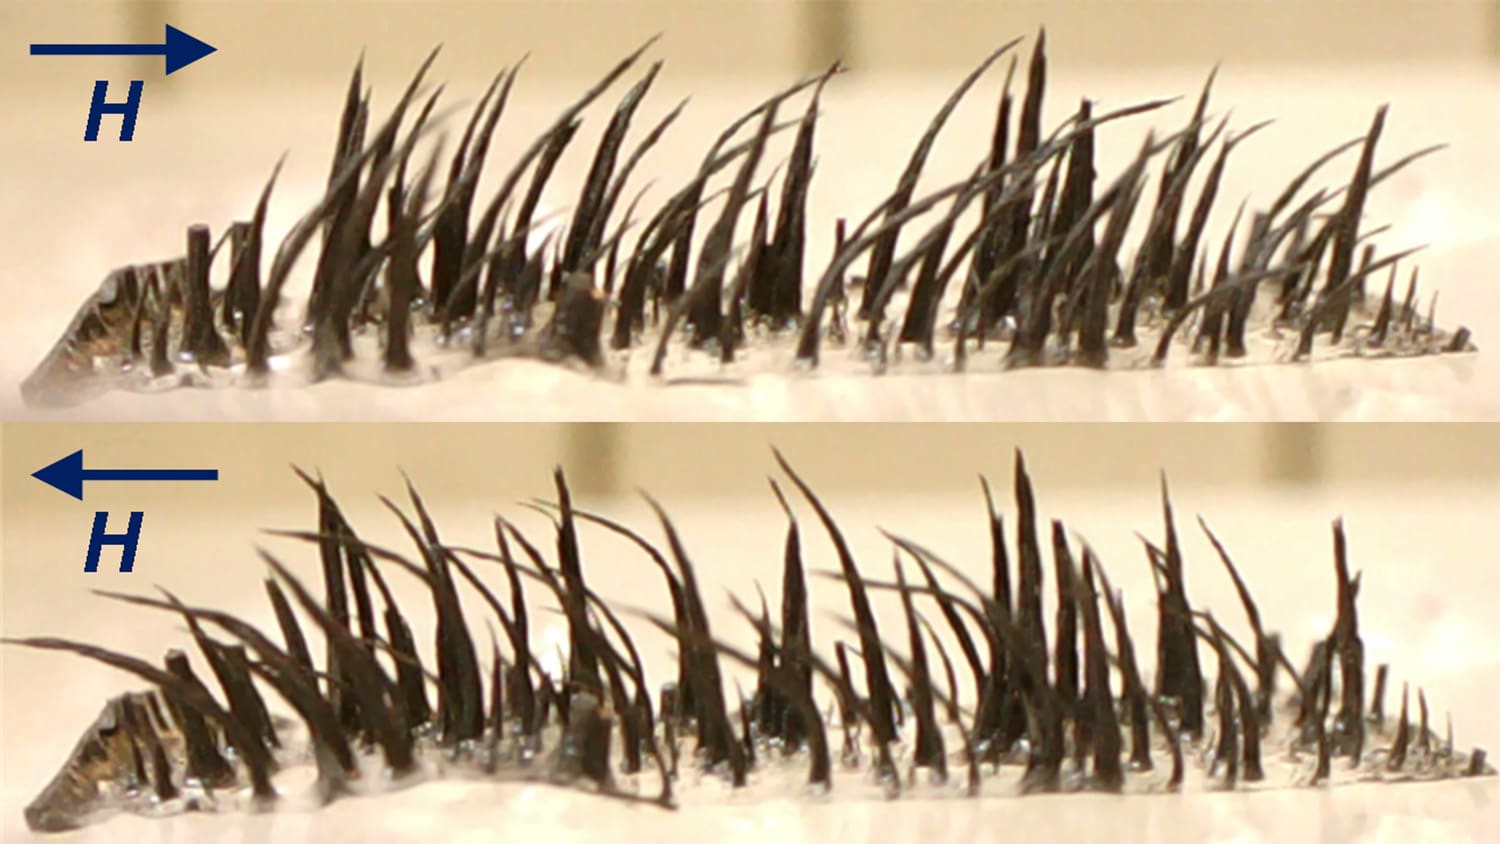 photo includes two images. The first shows a bunch of black wires sticking up from a white substrate and leaning right. The second shows the wires leaning left.